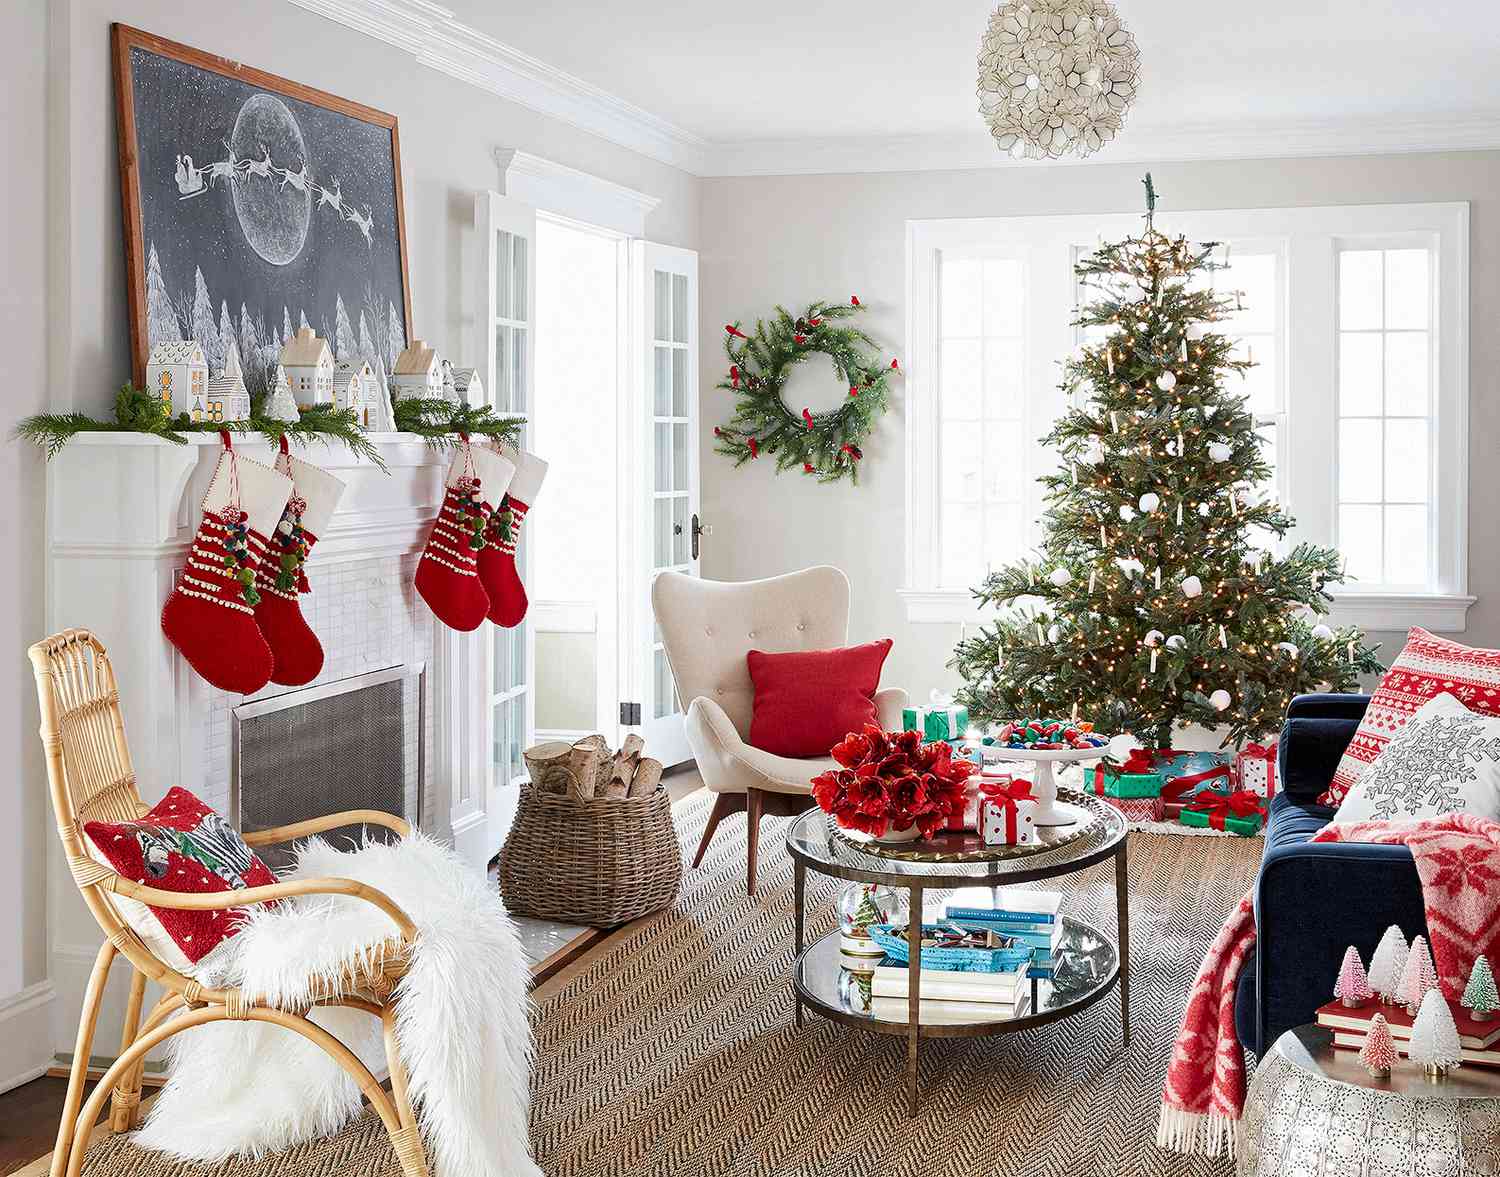 How Early Should You Start Decorating Your House For Christmas Edm Chicago